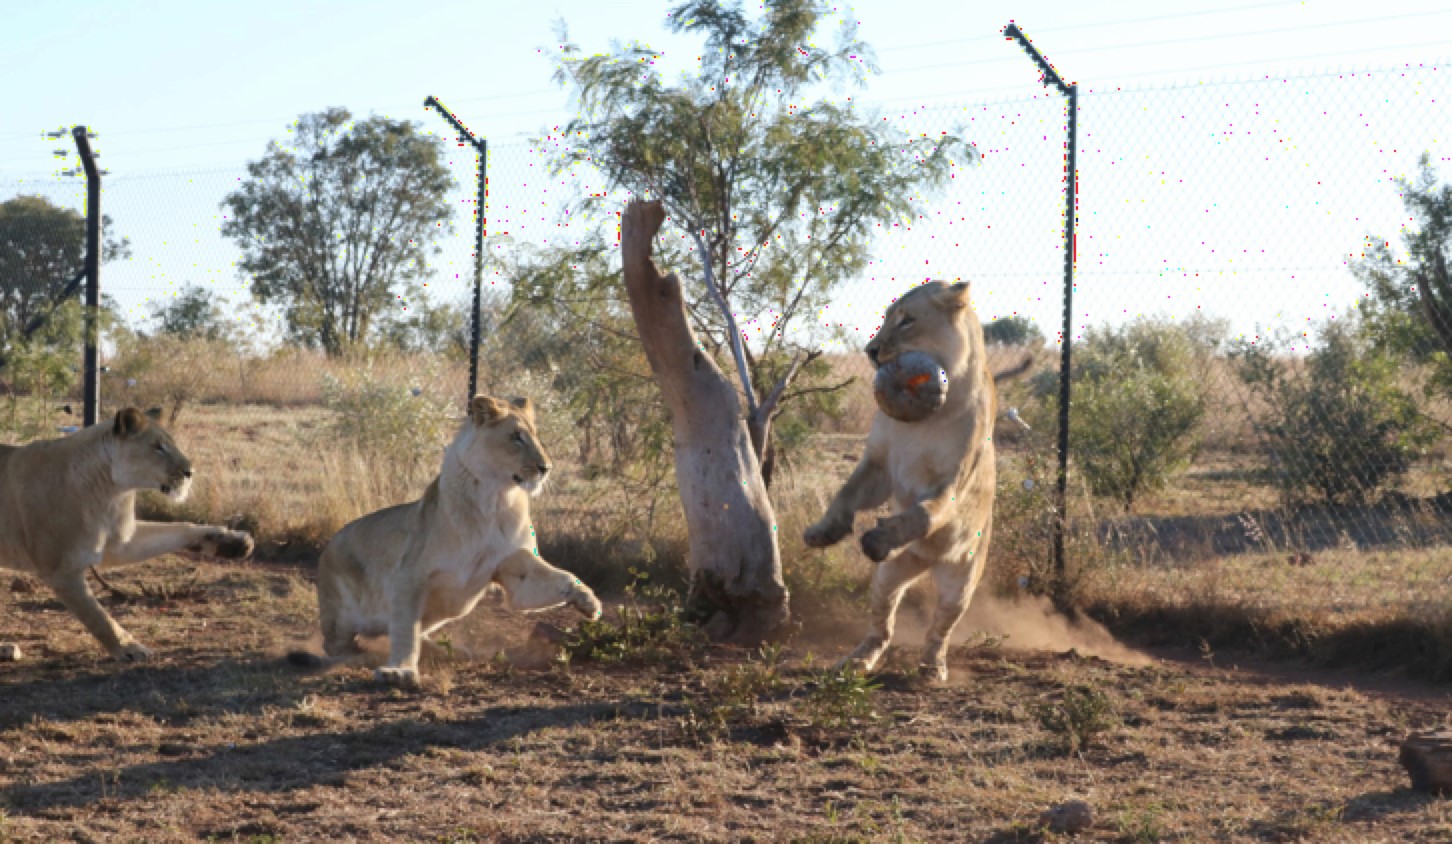 Lions playing with their favorite pumpkin toy. CREDIT: Jessica Burkhart